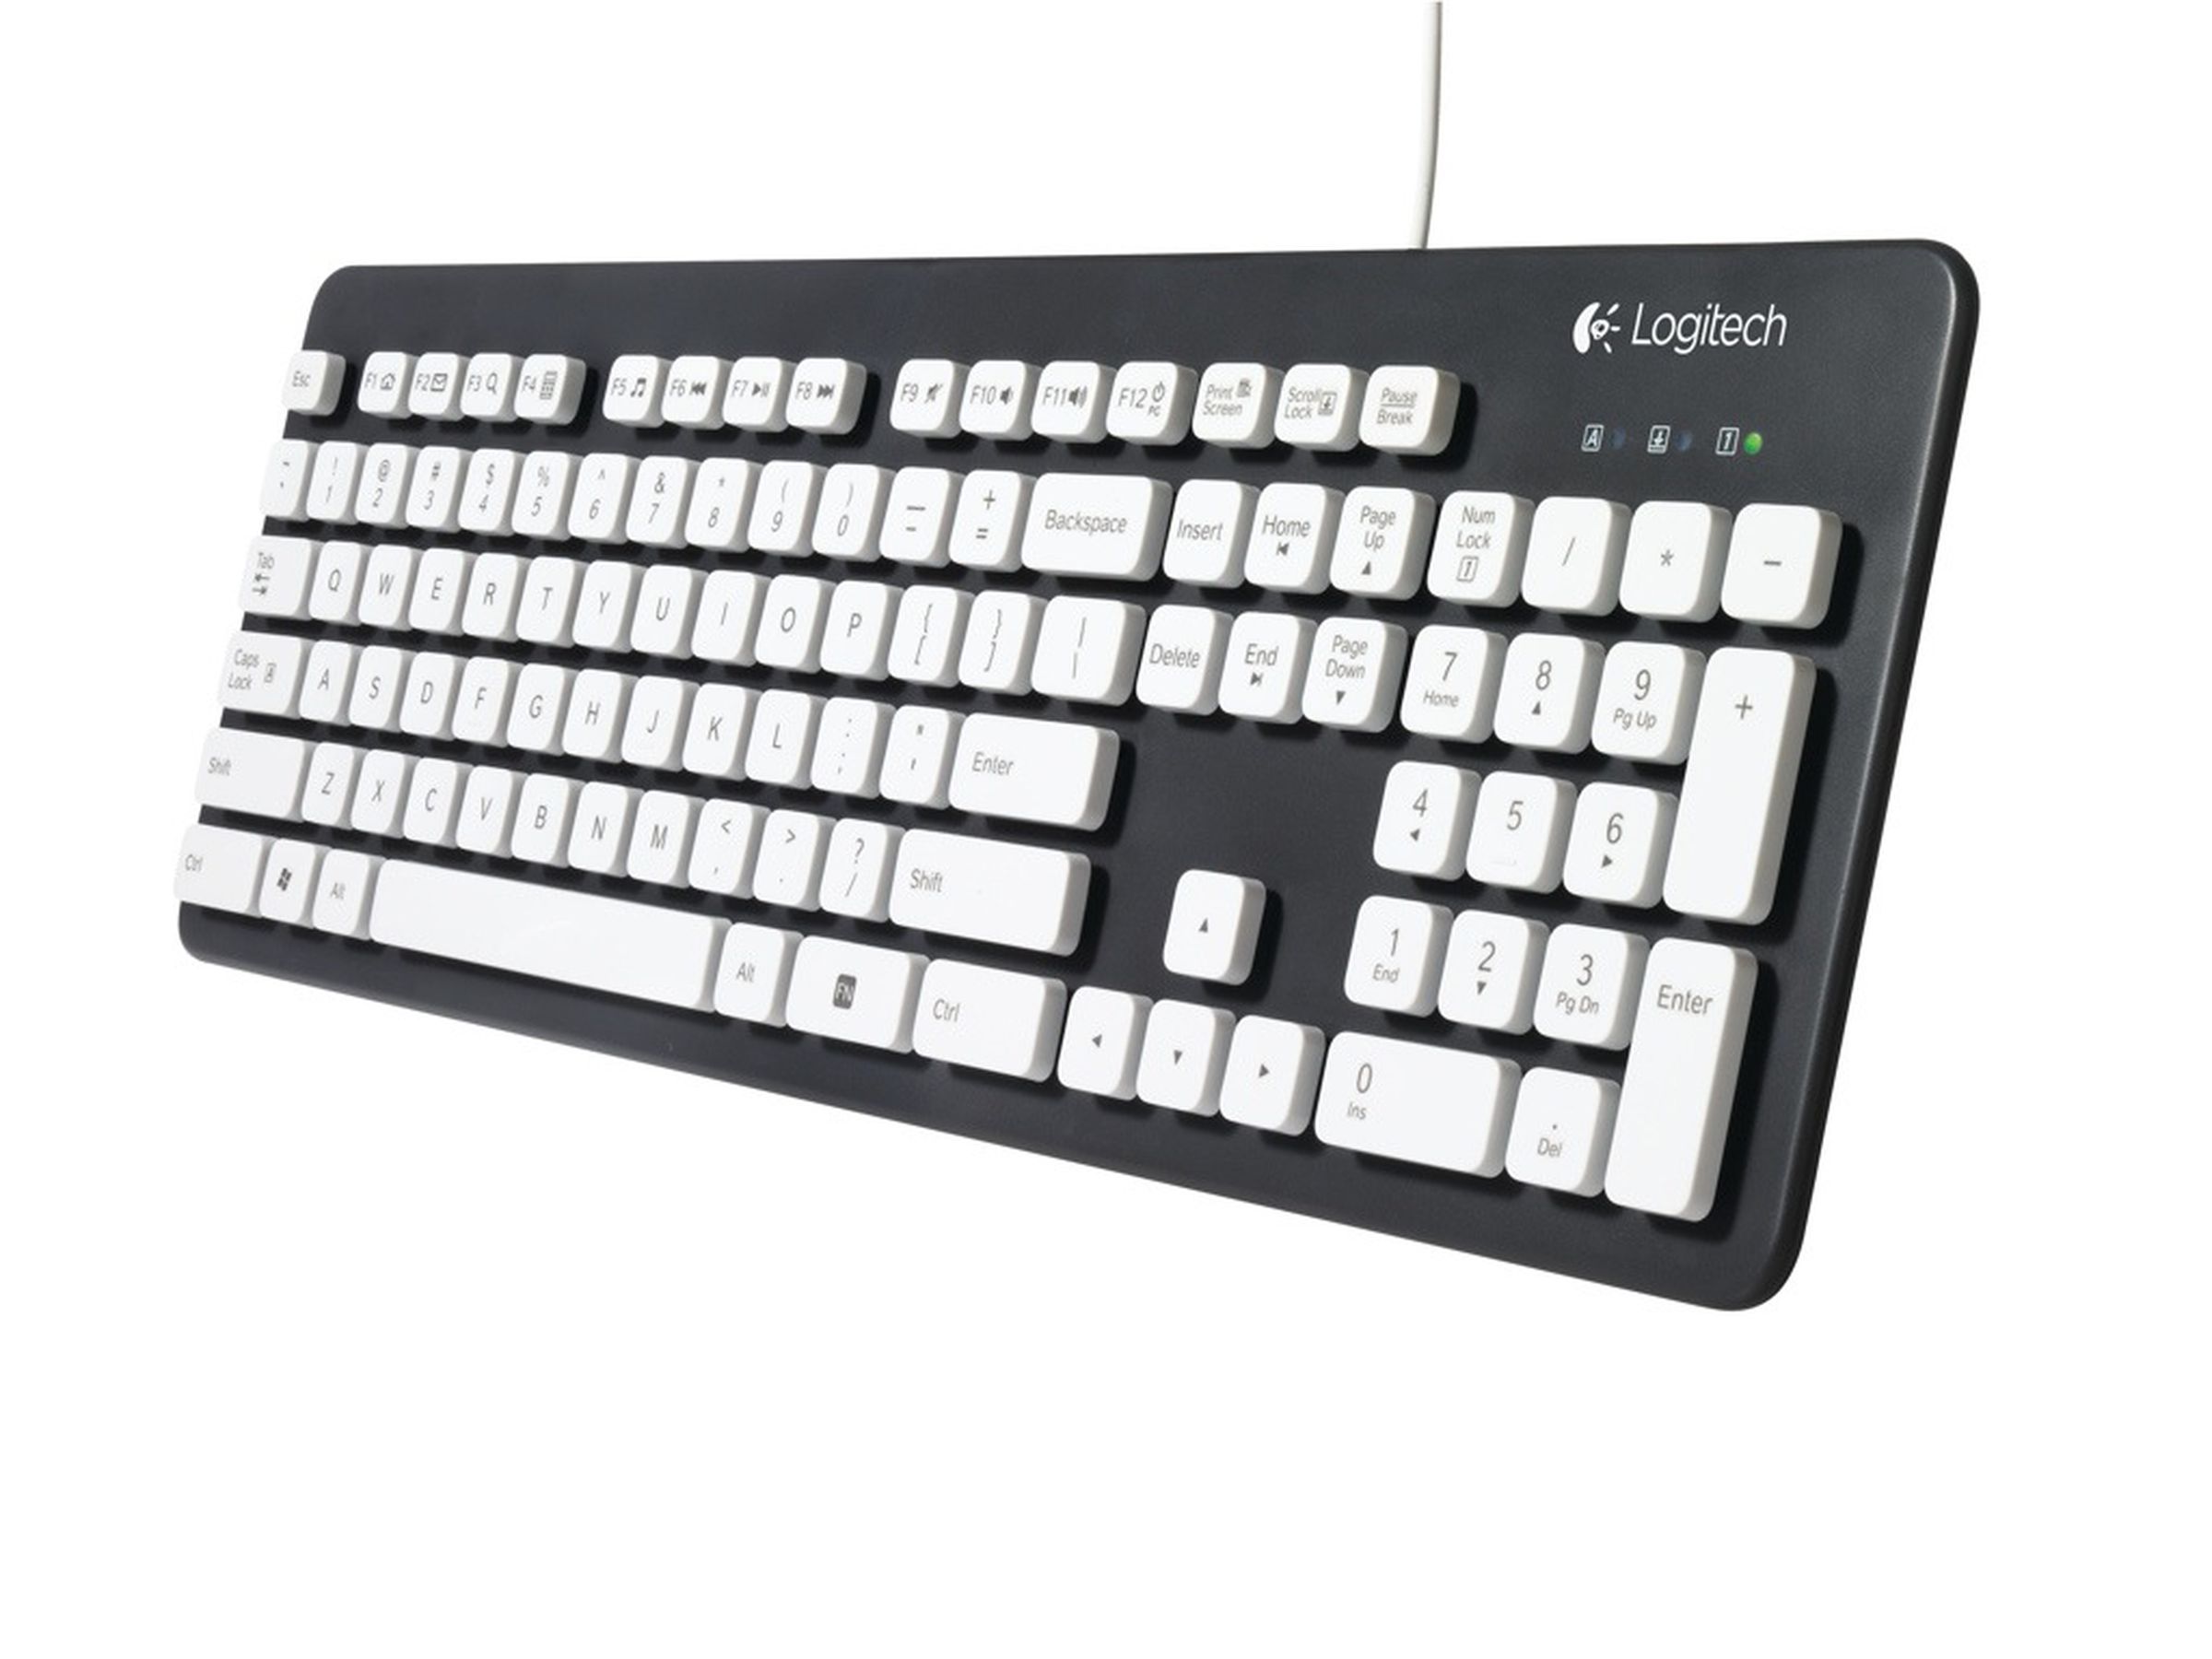 Logitech Washable Keyboard K310 official photos